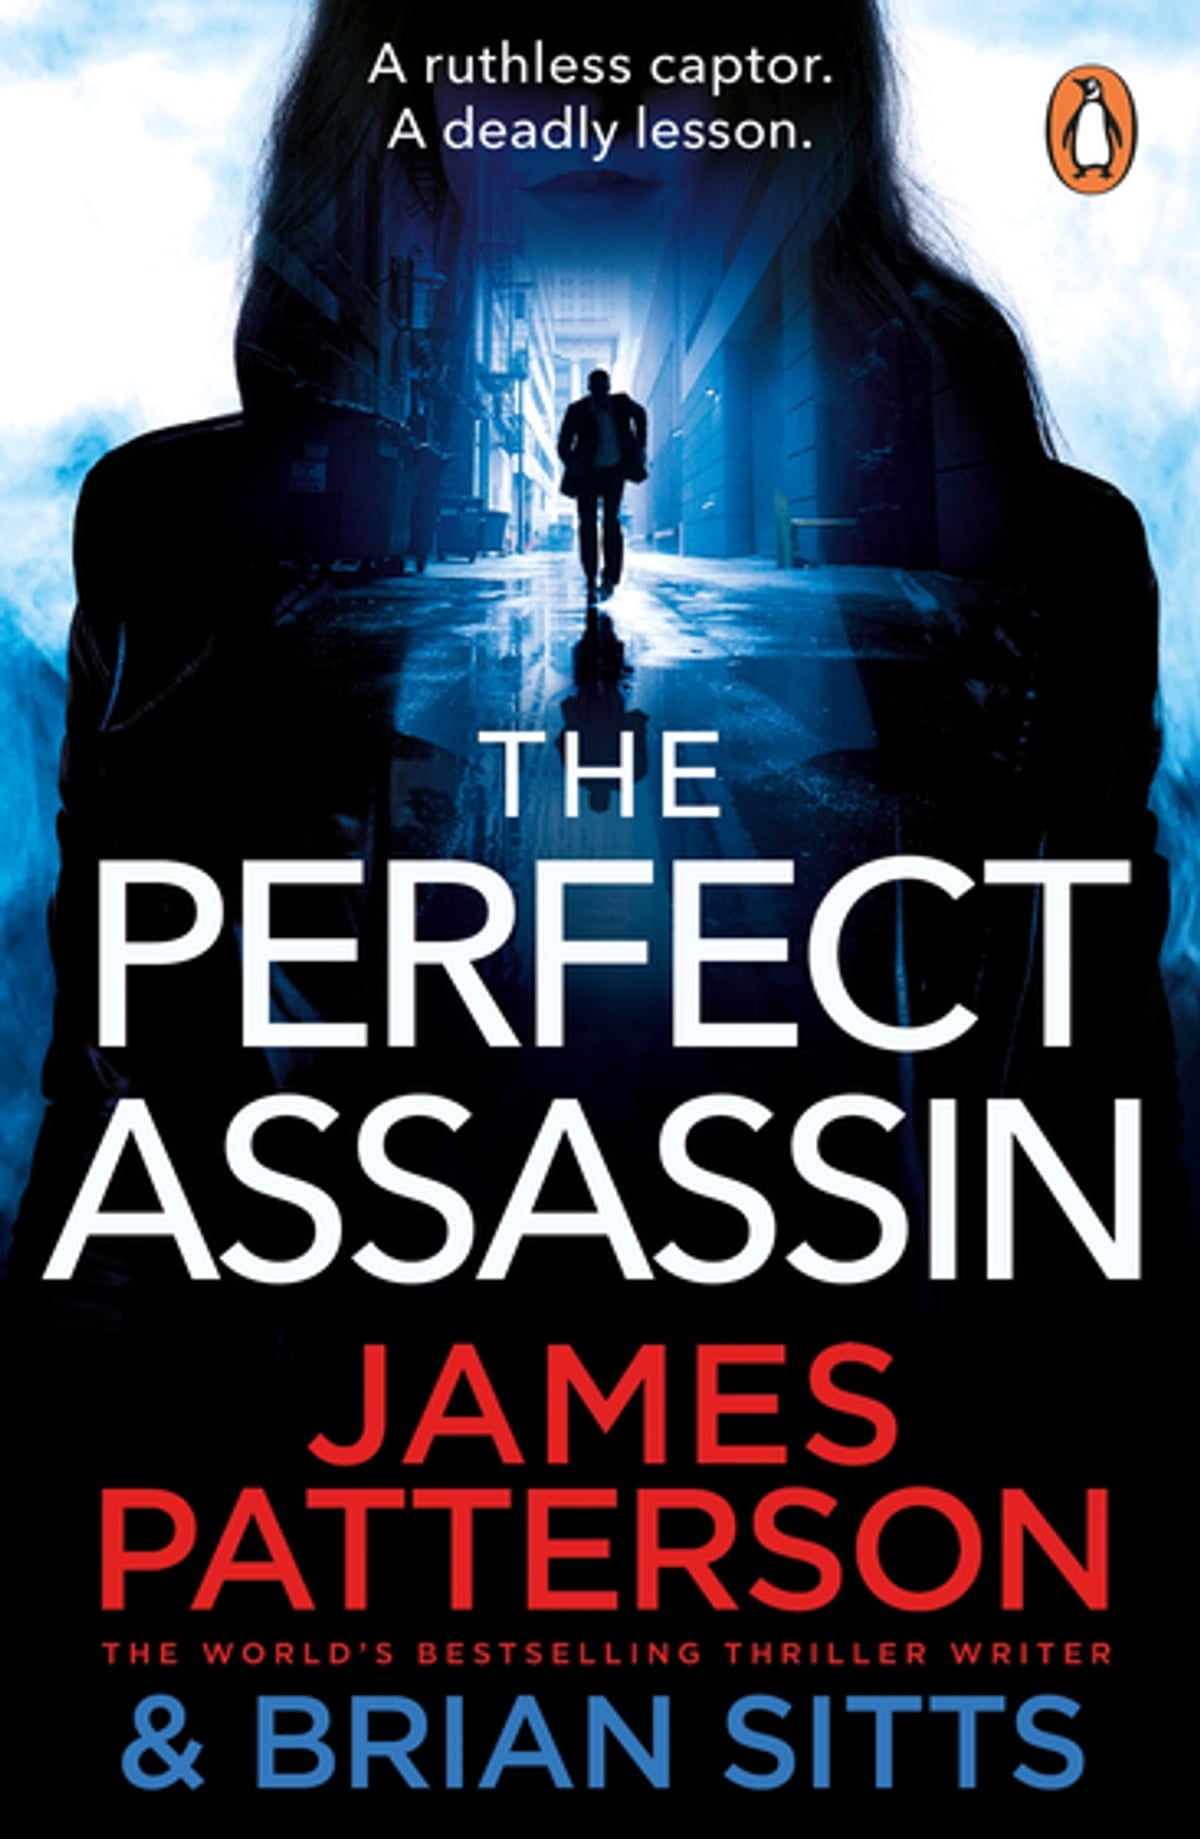 The Perfect Assassin: A ruthless captor. A deadly lesson.